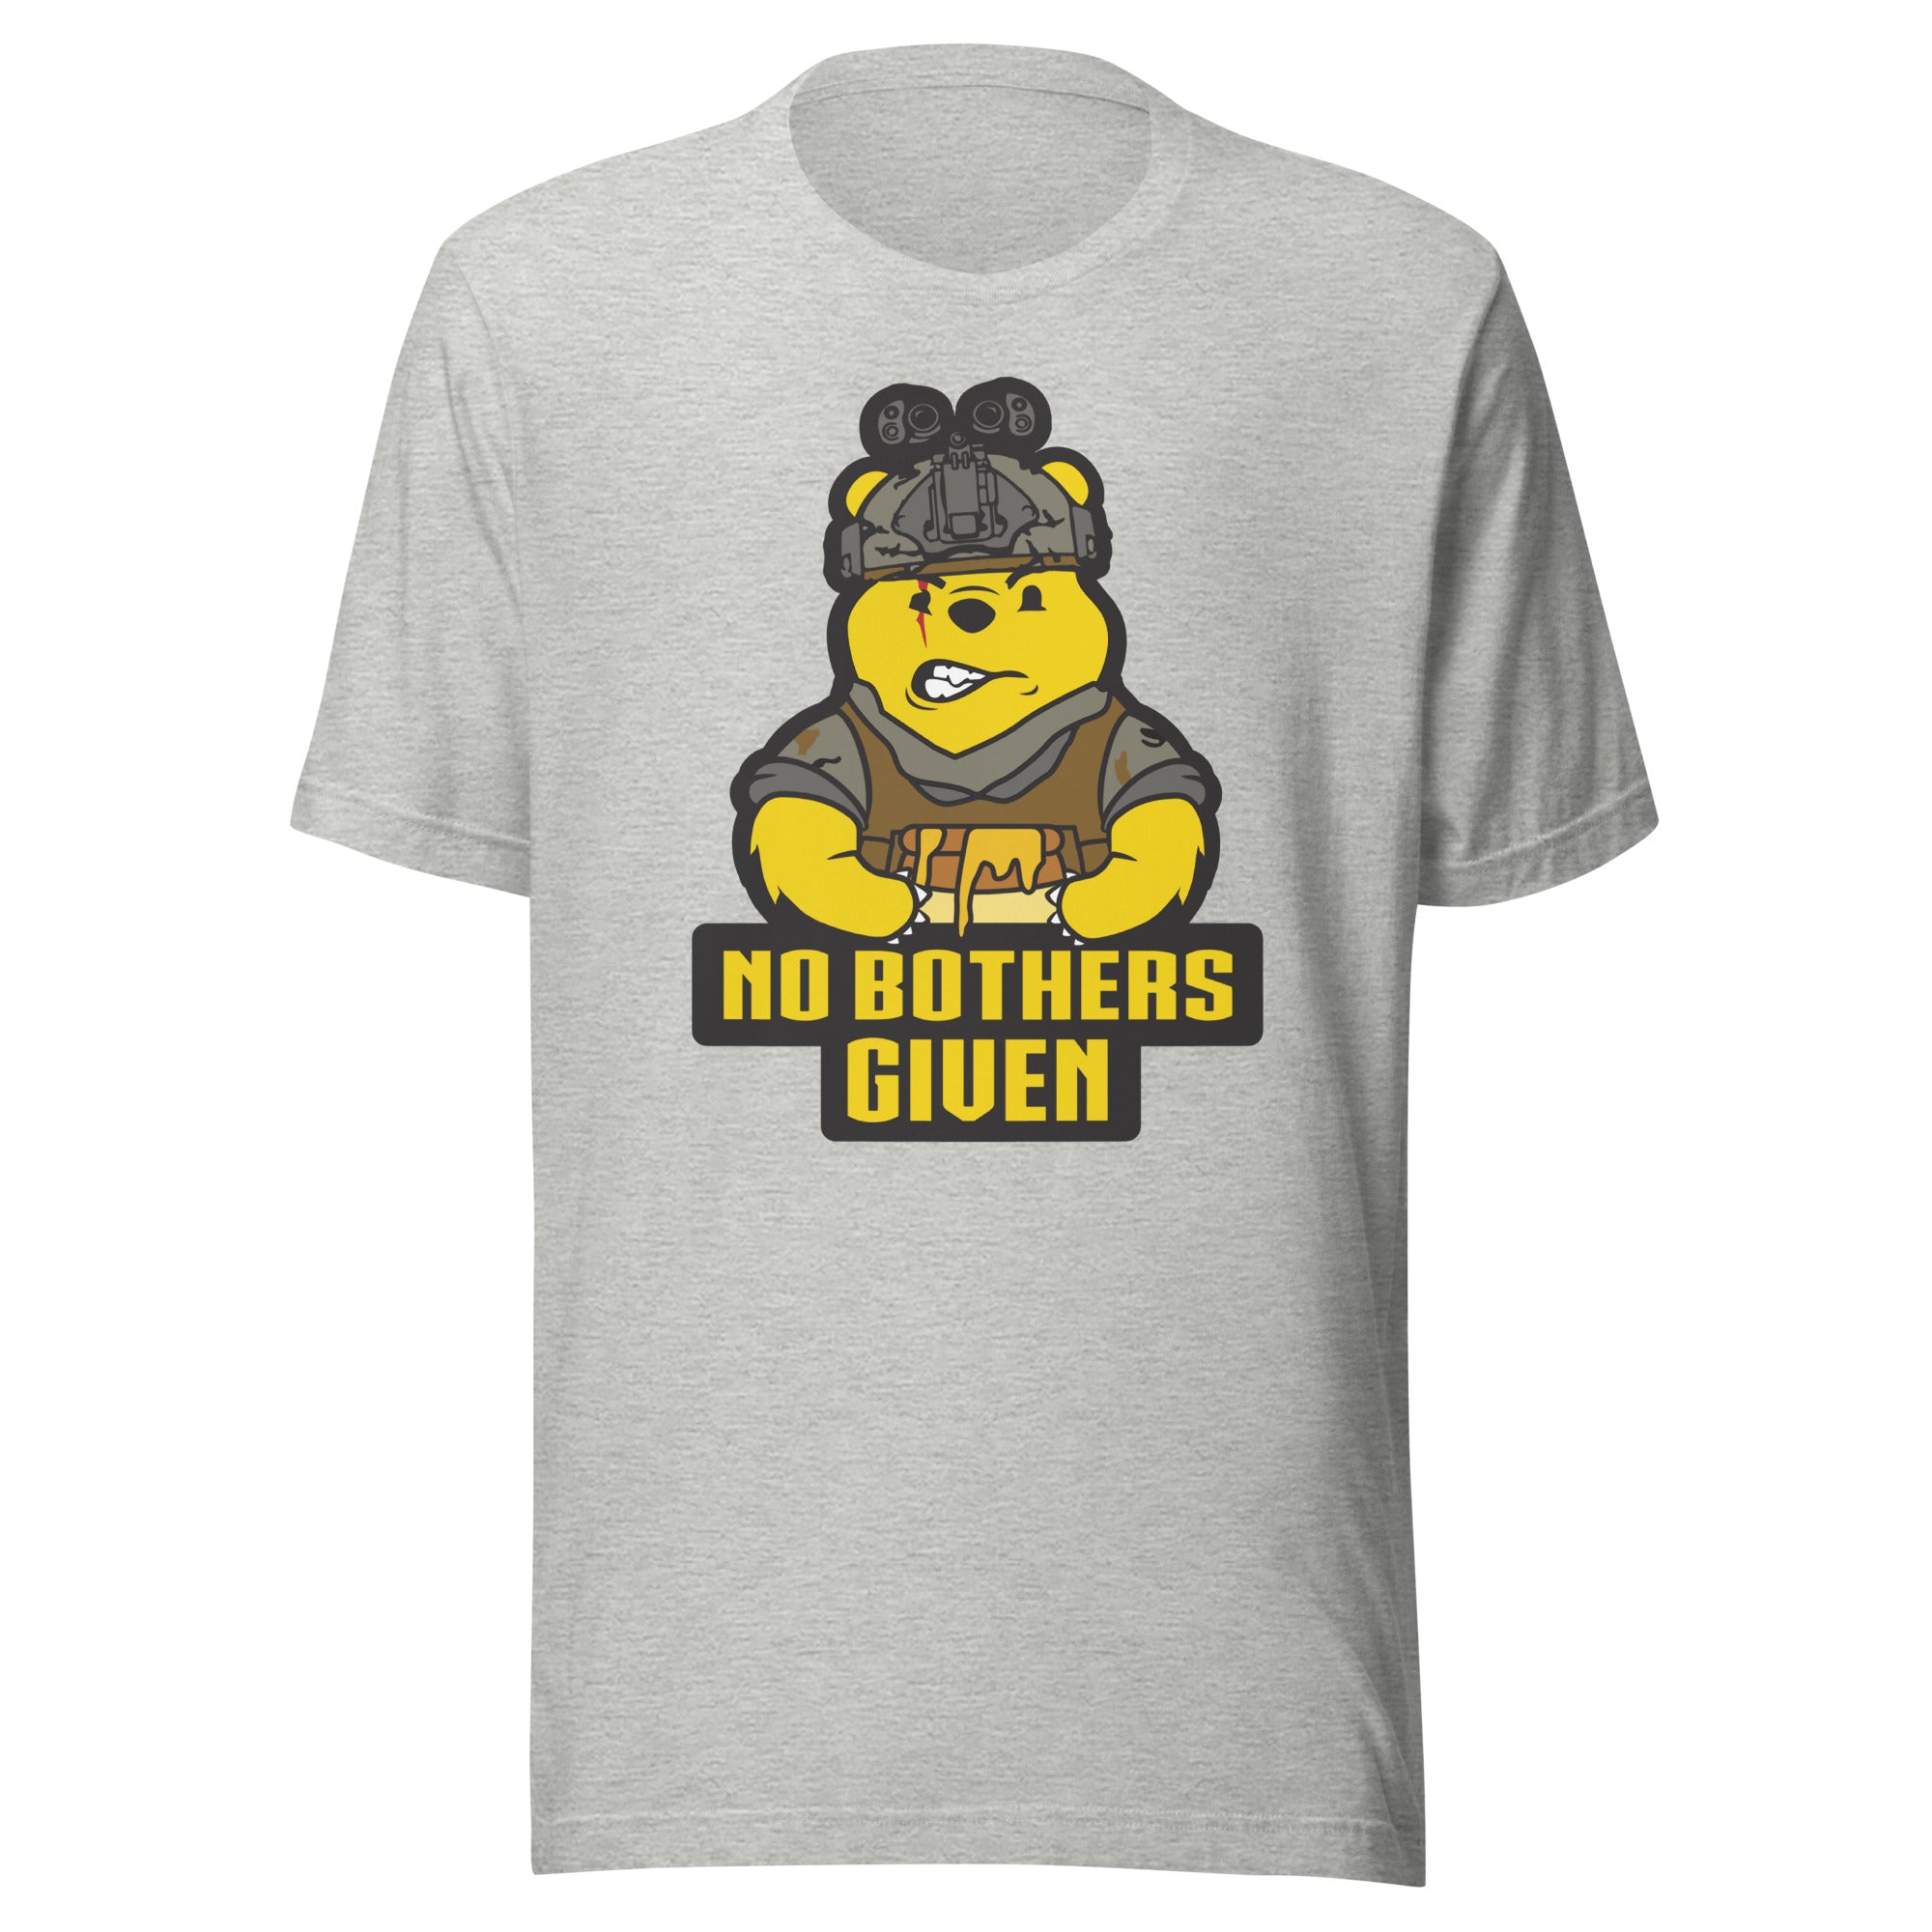 No Bothers Given - Unisex t-shirt